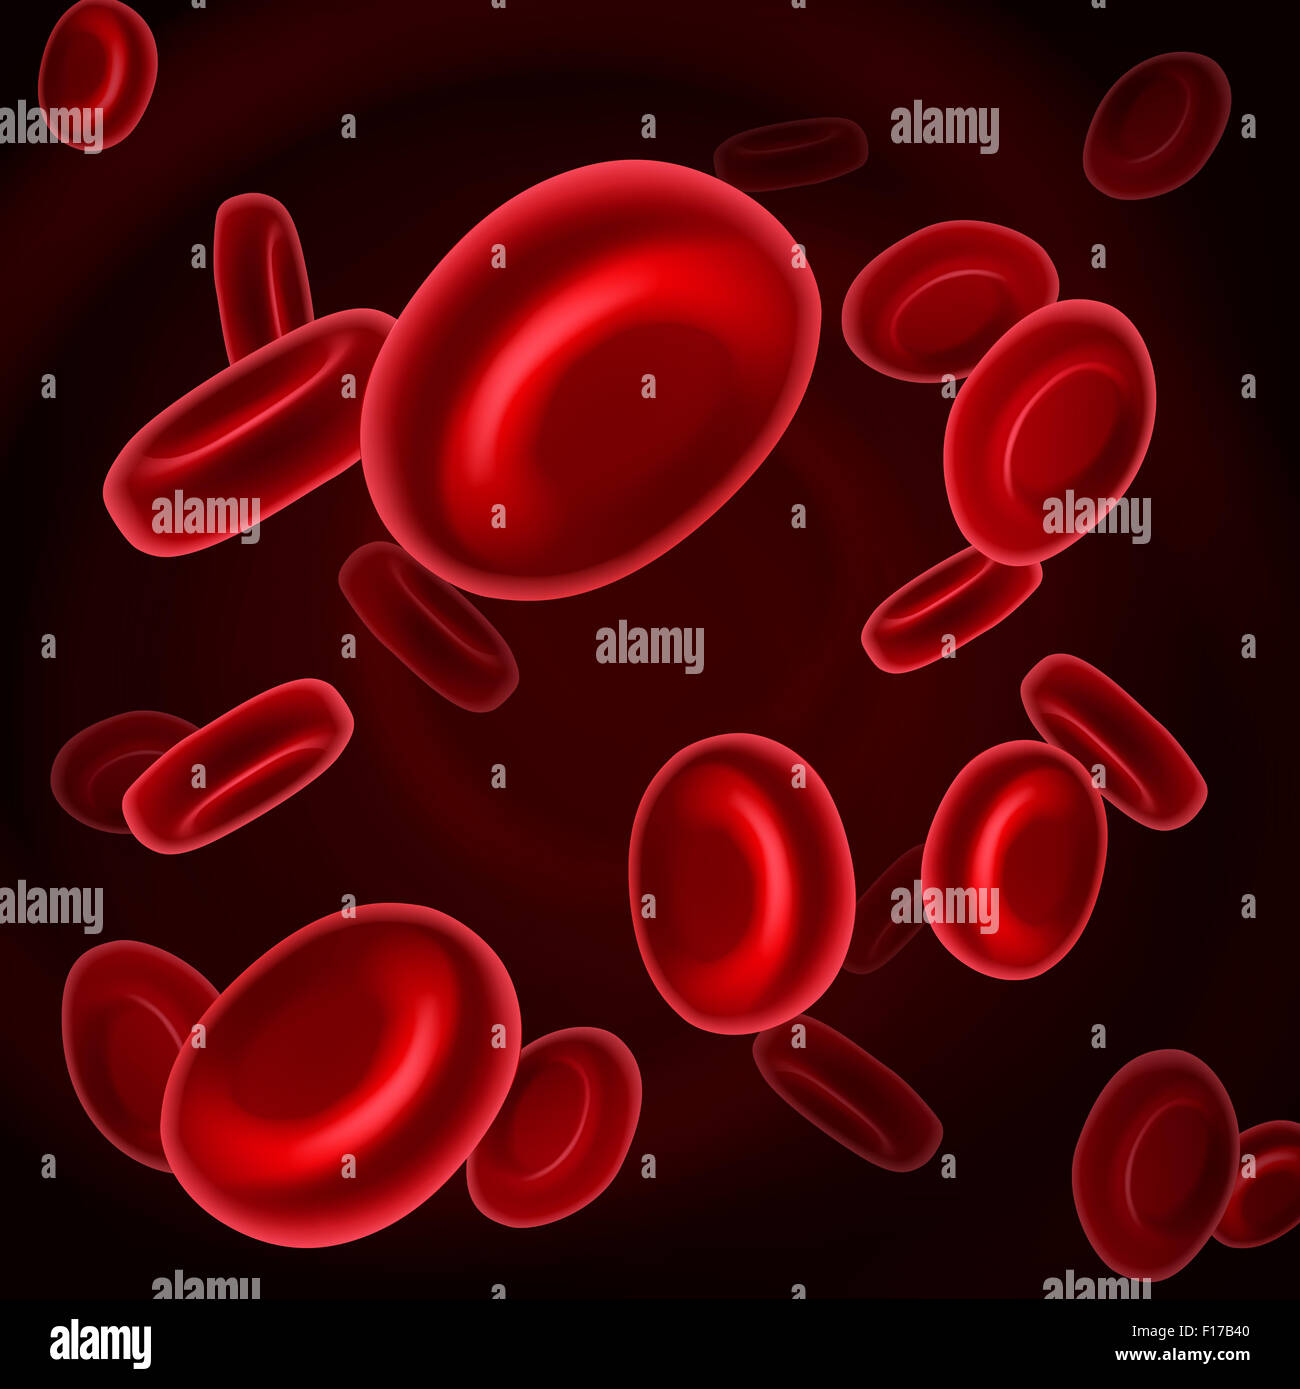 An illustration of a microscopic view of red human blood cells Stock Photo